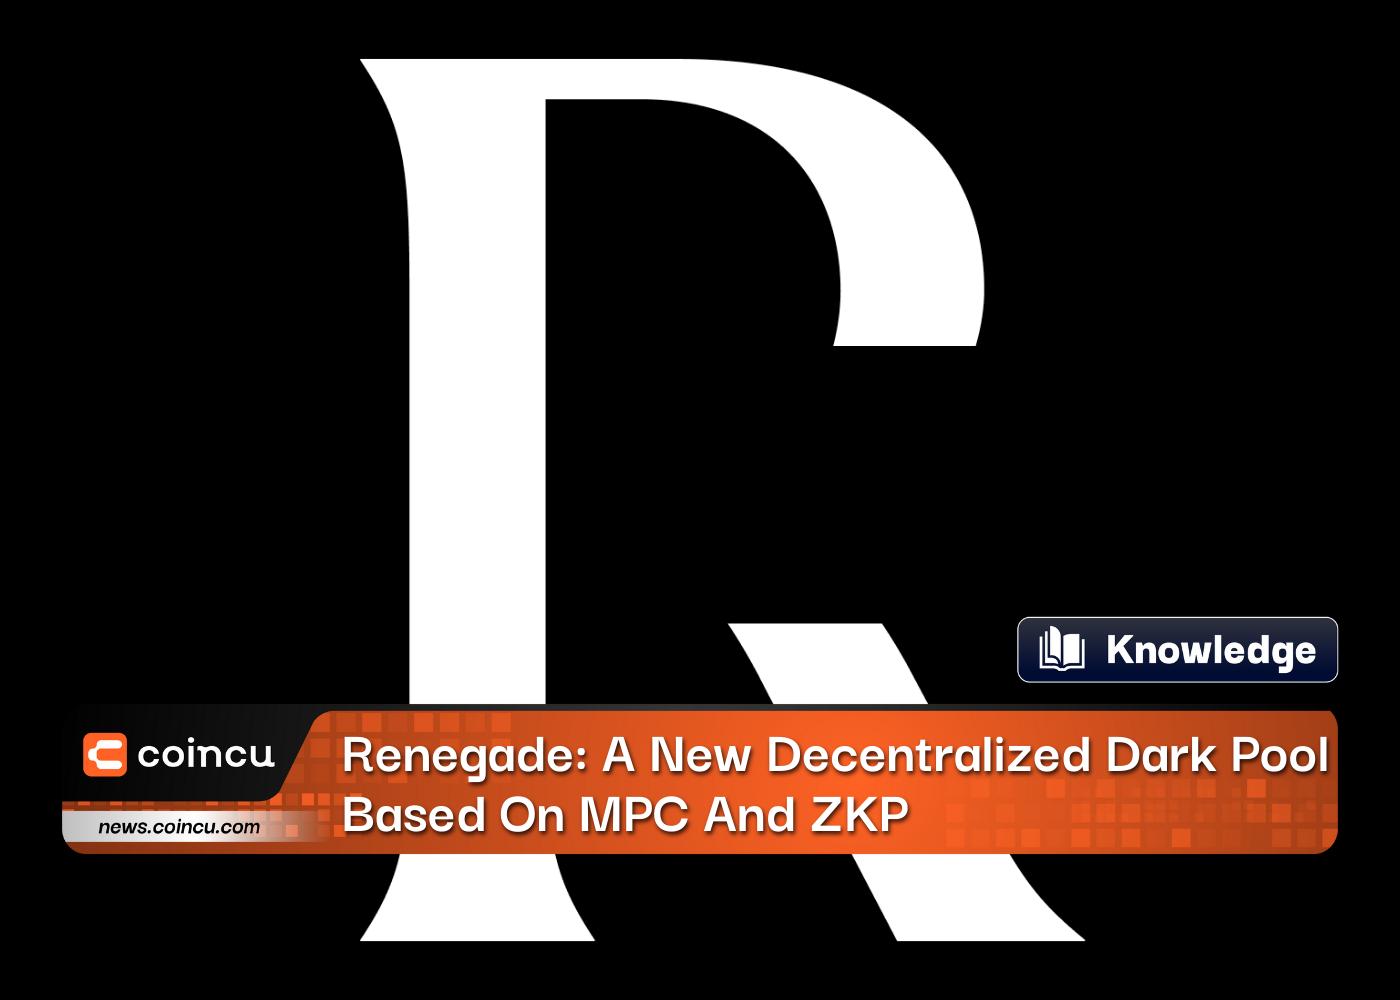 Renegade: A New Decentralized Dark Pool Based On MPC And ZKP